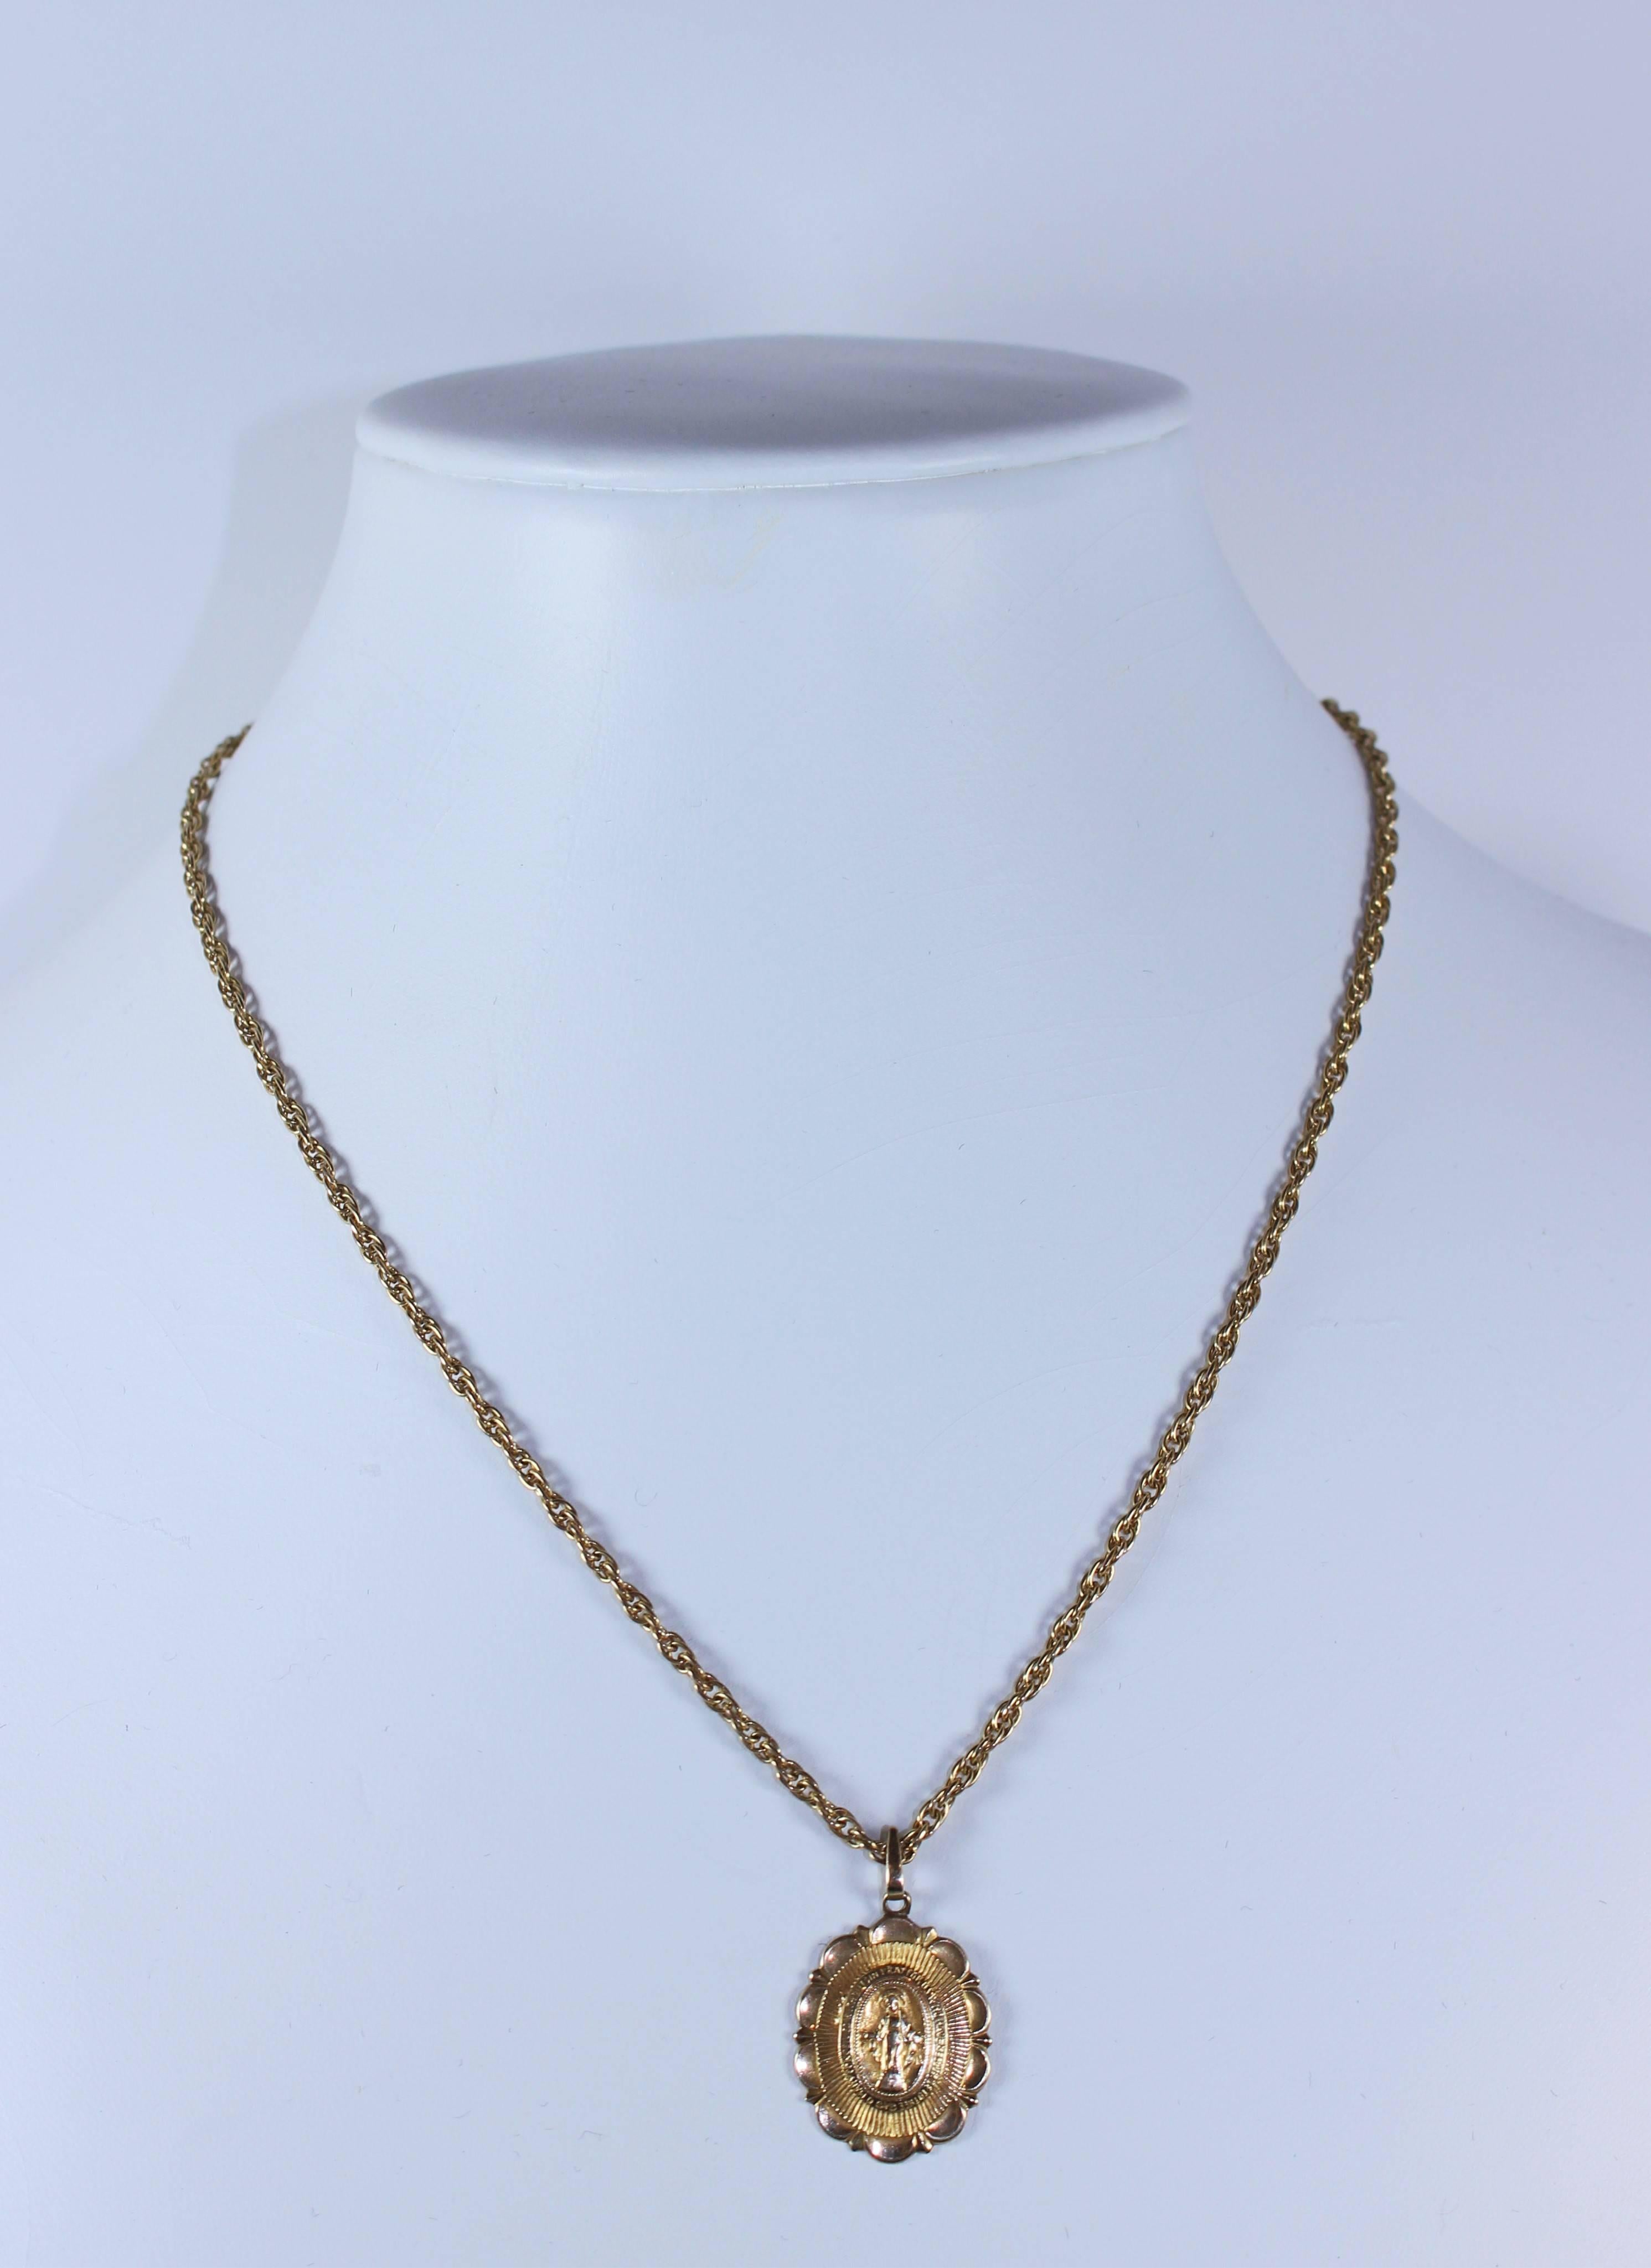 This necklace is gold filled. Features a Mary pendant and chain. Has a clasp closure. In excellent condition.

Specs: 
Yellow Gold Filled
Length: 15